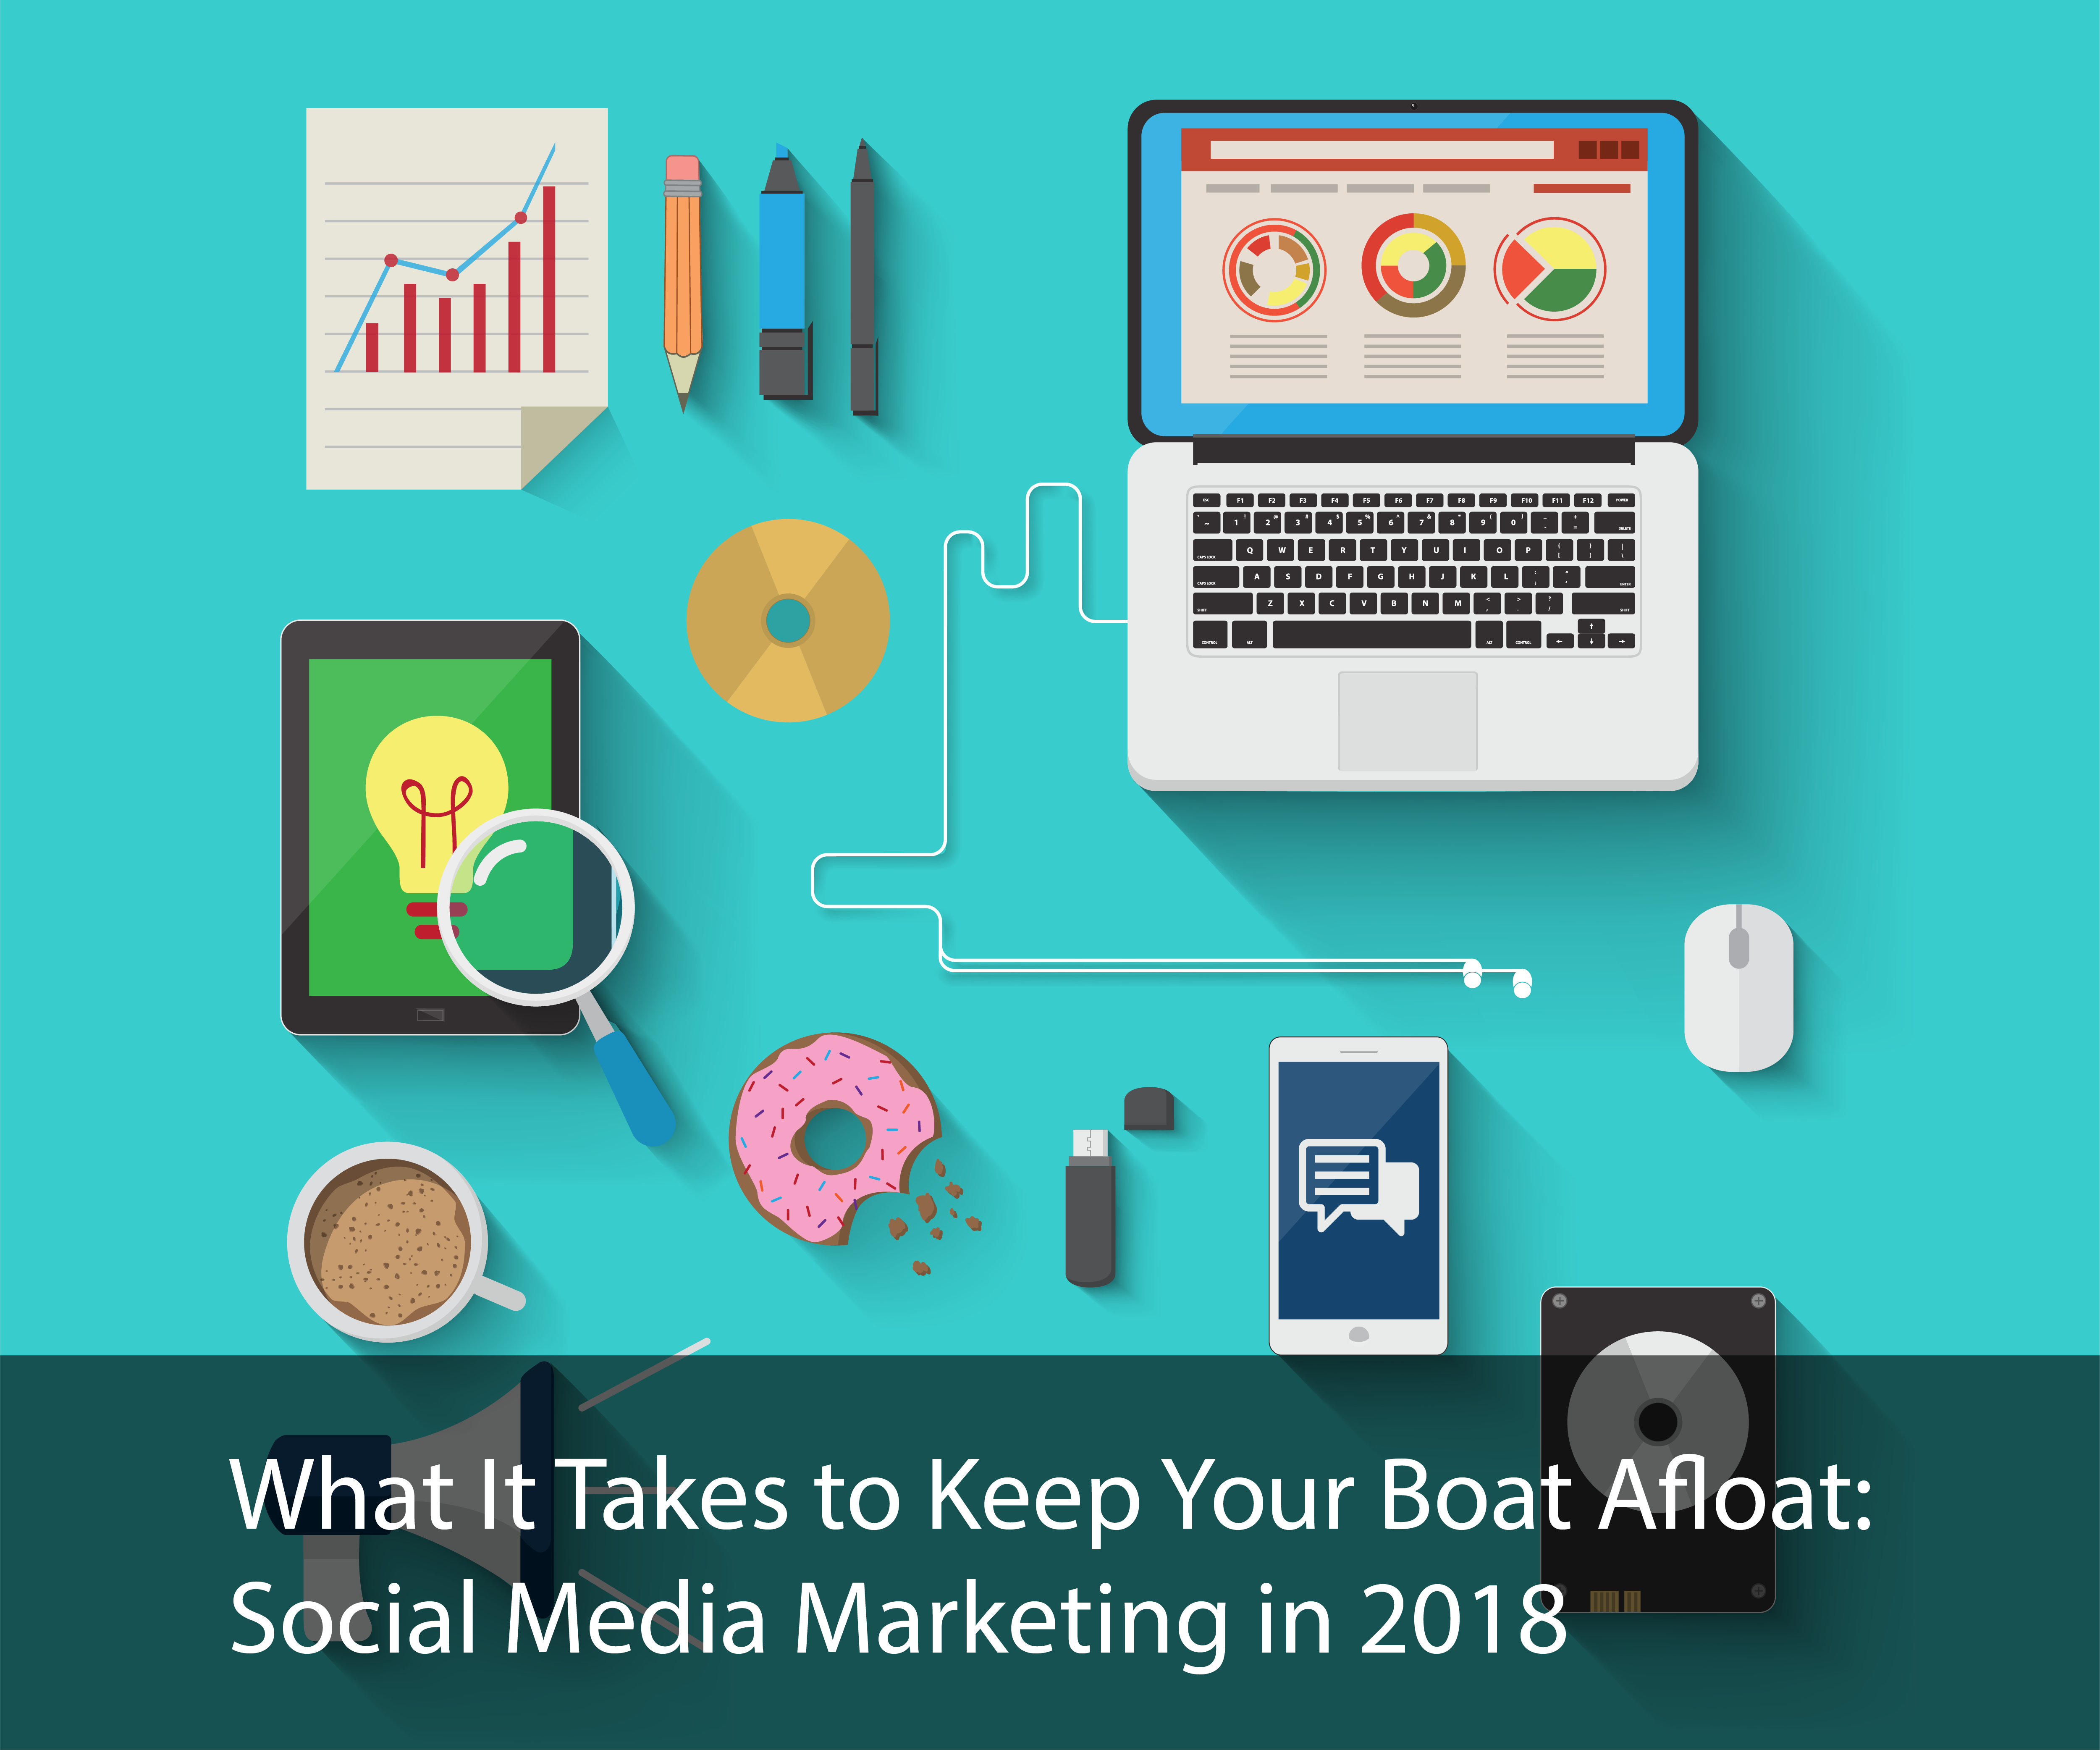 What It Takes to Keep Your Boat Afloat: Social Media Marketing in 2018